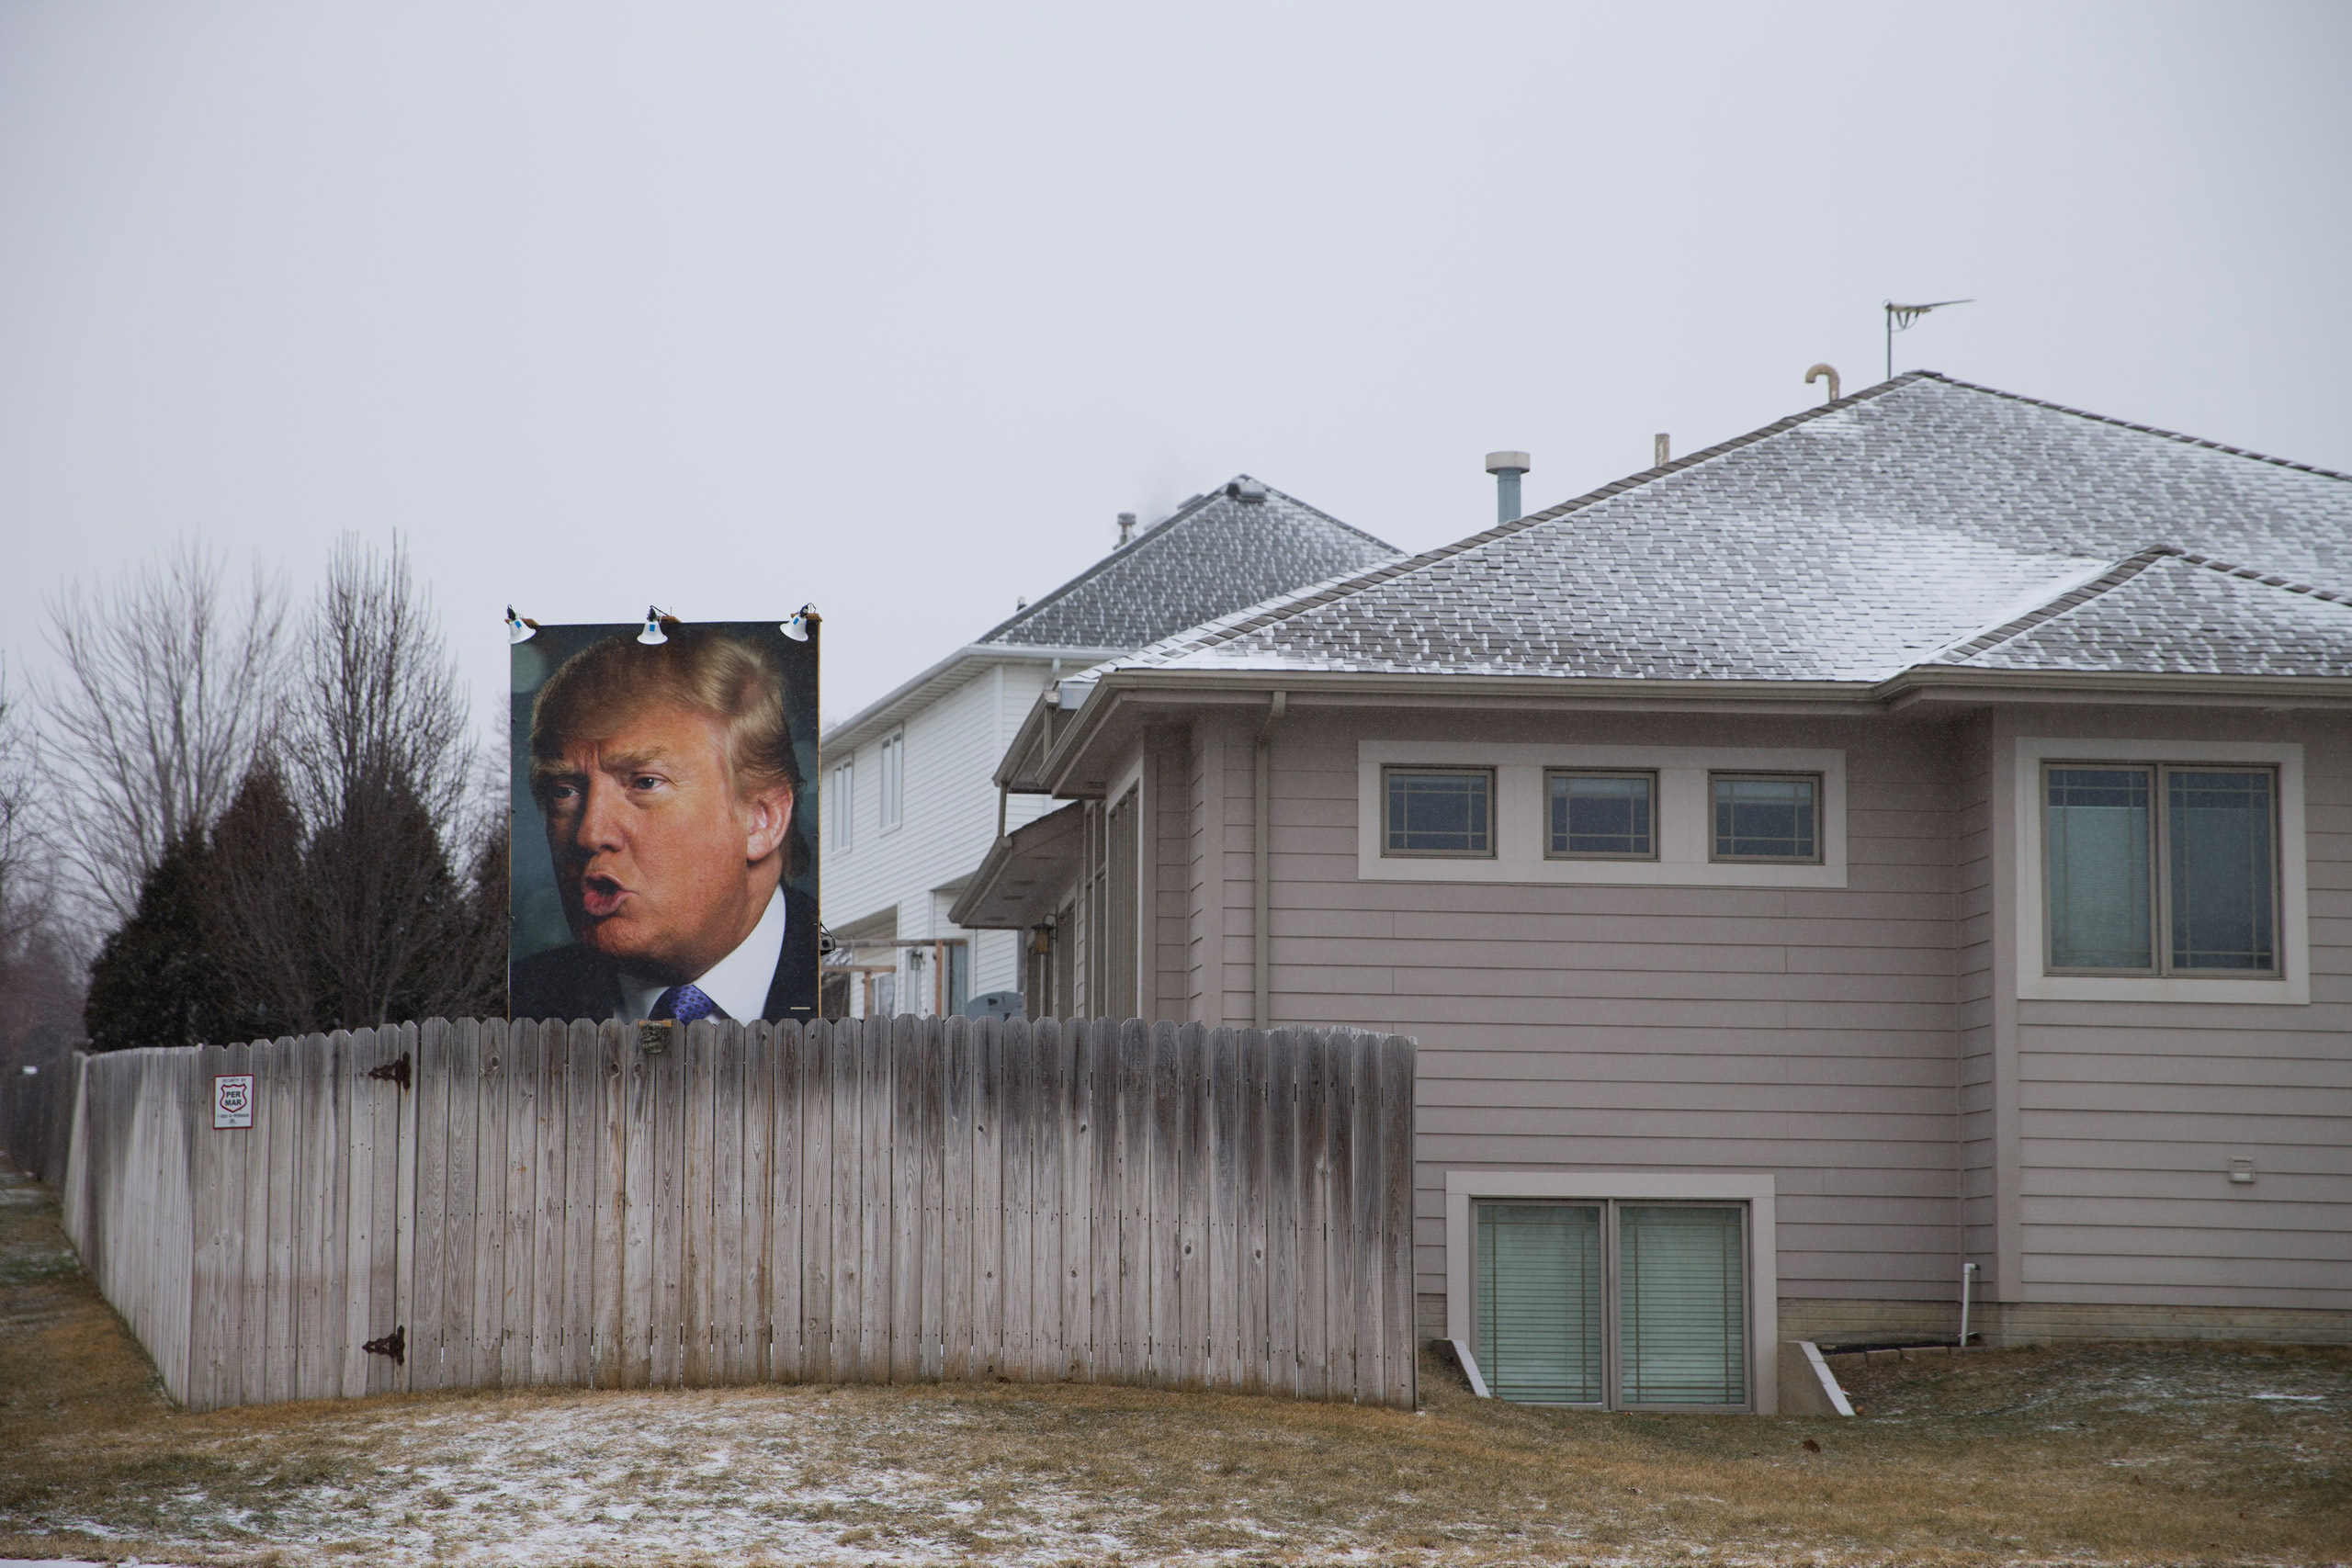 A photo of Republican presidential candidate Donald Trump hangs outside a home Tuesday, Jan. 19, 2016, in West Des Moines, Iowa. (AP Photo/Jae C. Hong)